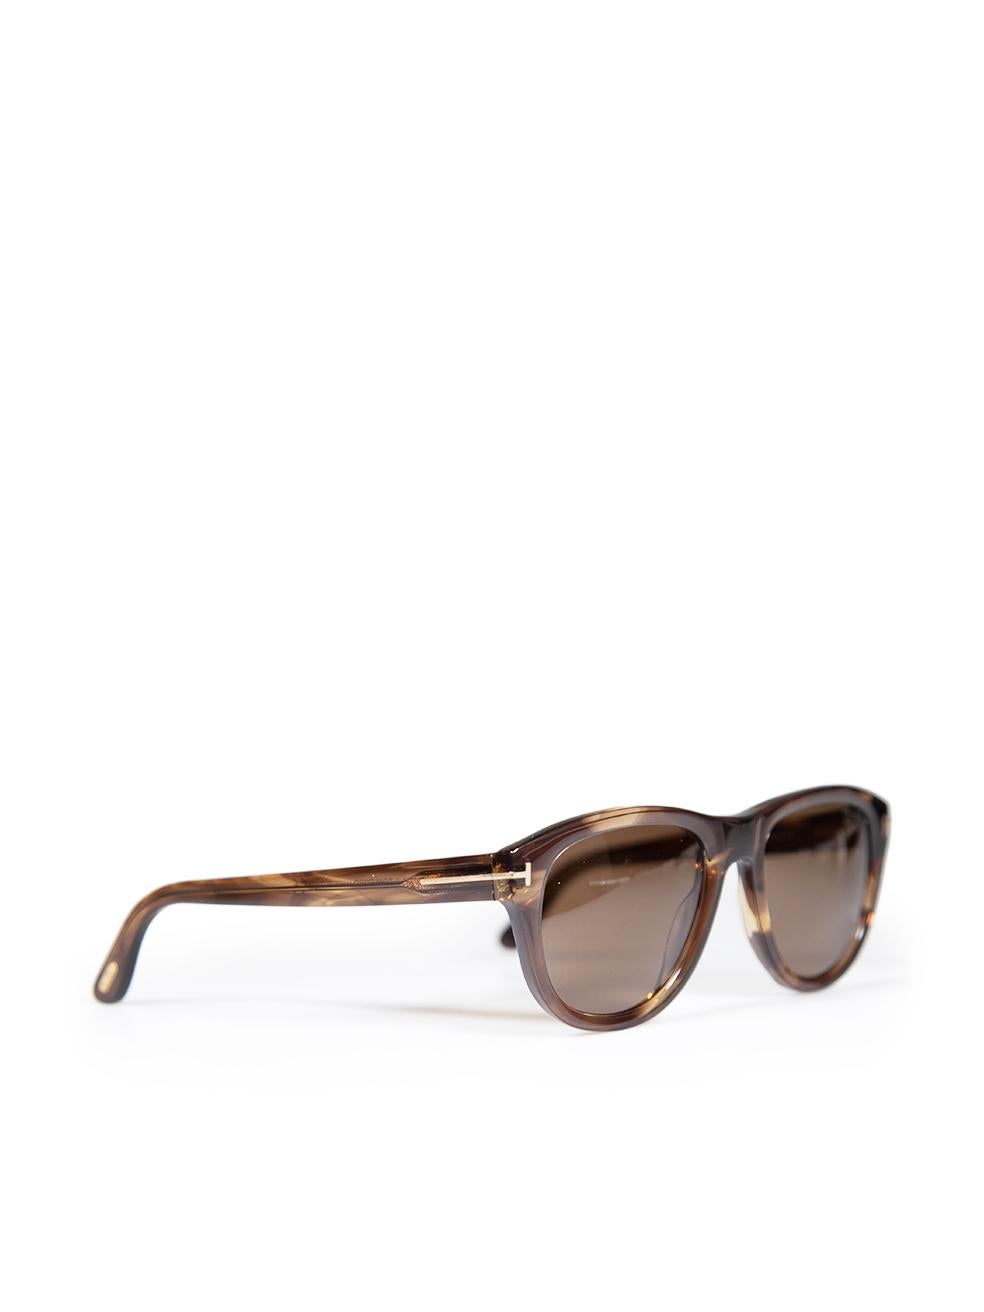 Tom Ford Brown Benedict Cat Eye Sunglasses In New Condition For Sale In London, GB